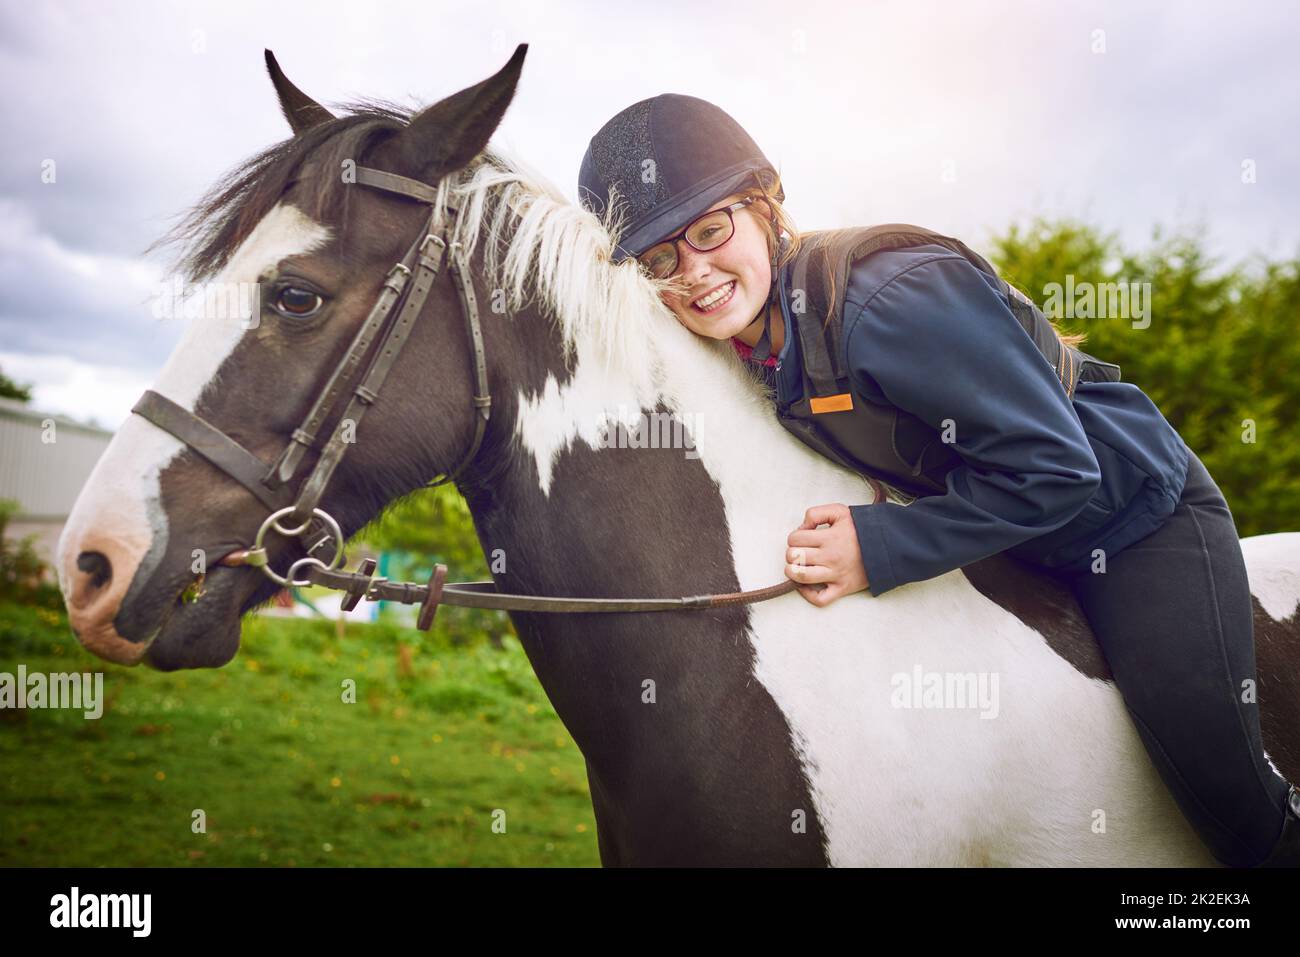 No one makes her as happy as her horse. Shot of a teenage girl going horseback riding on a ranch. Stock Photo